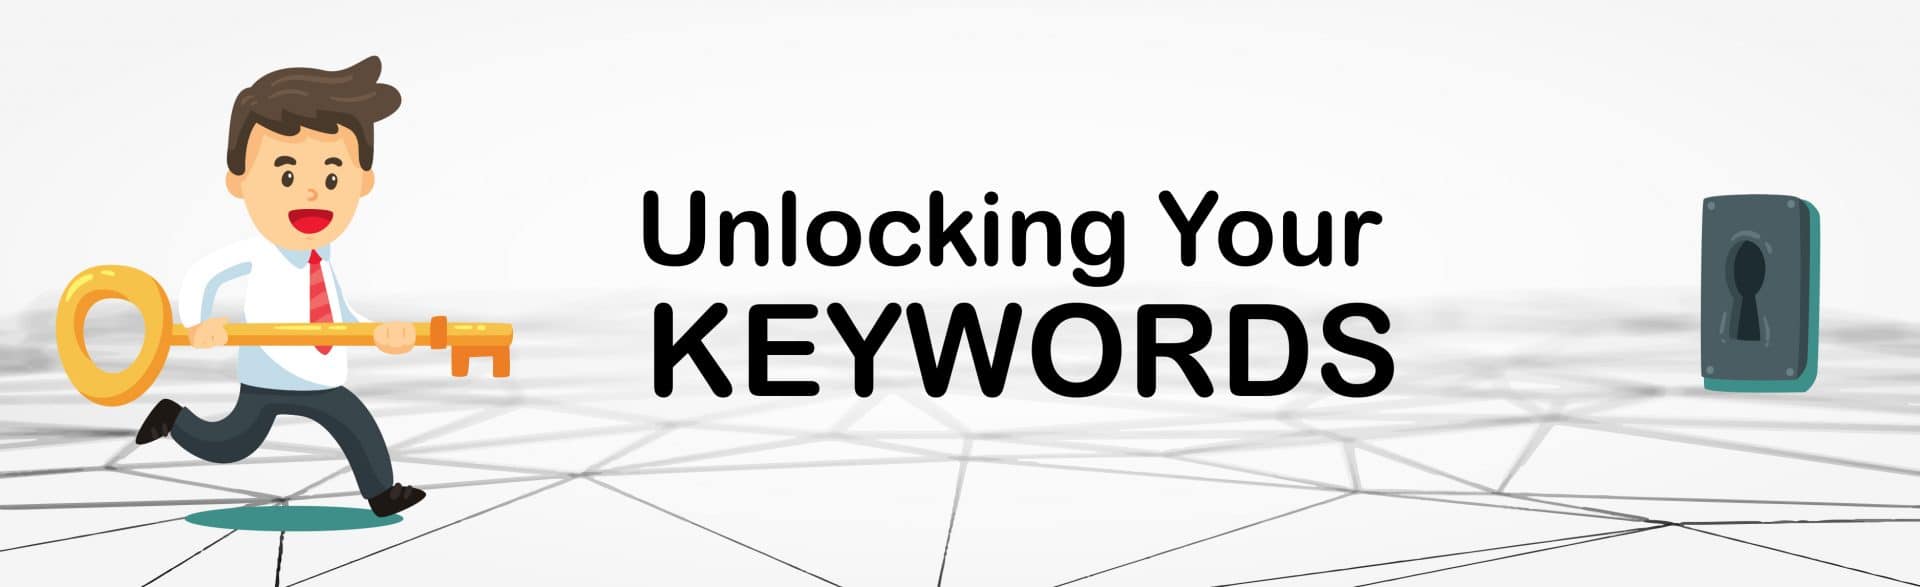 SEO Management and Content Marketing:  Unlocking Your Keywords